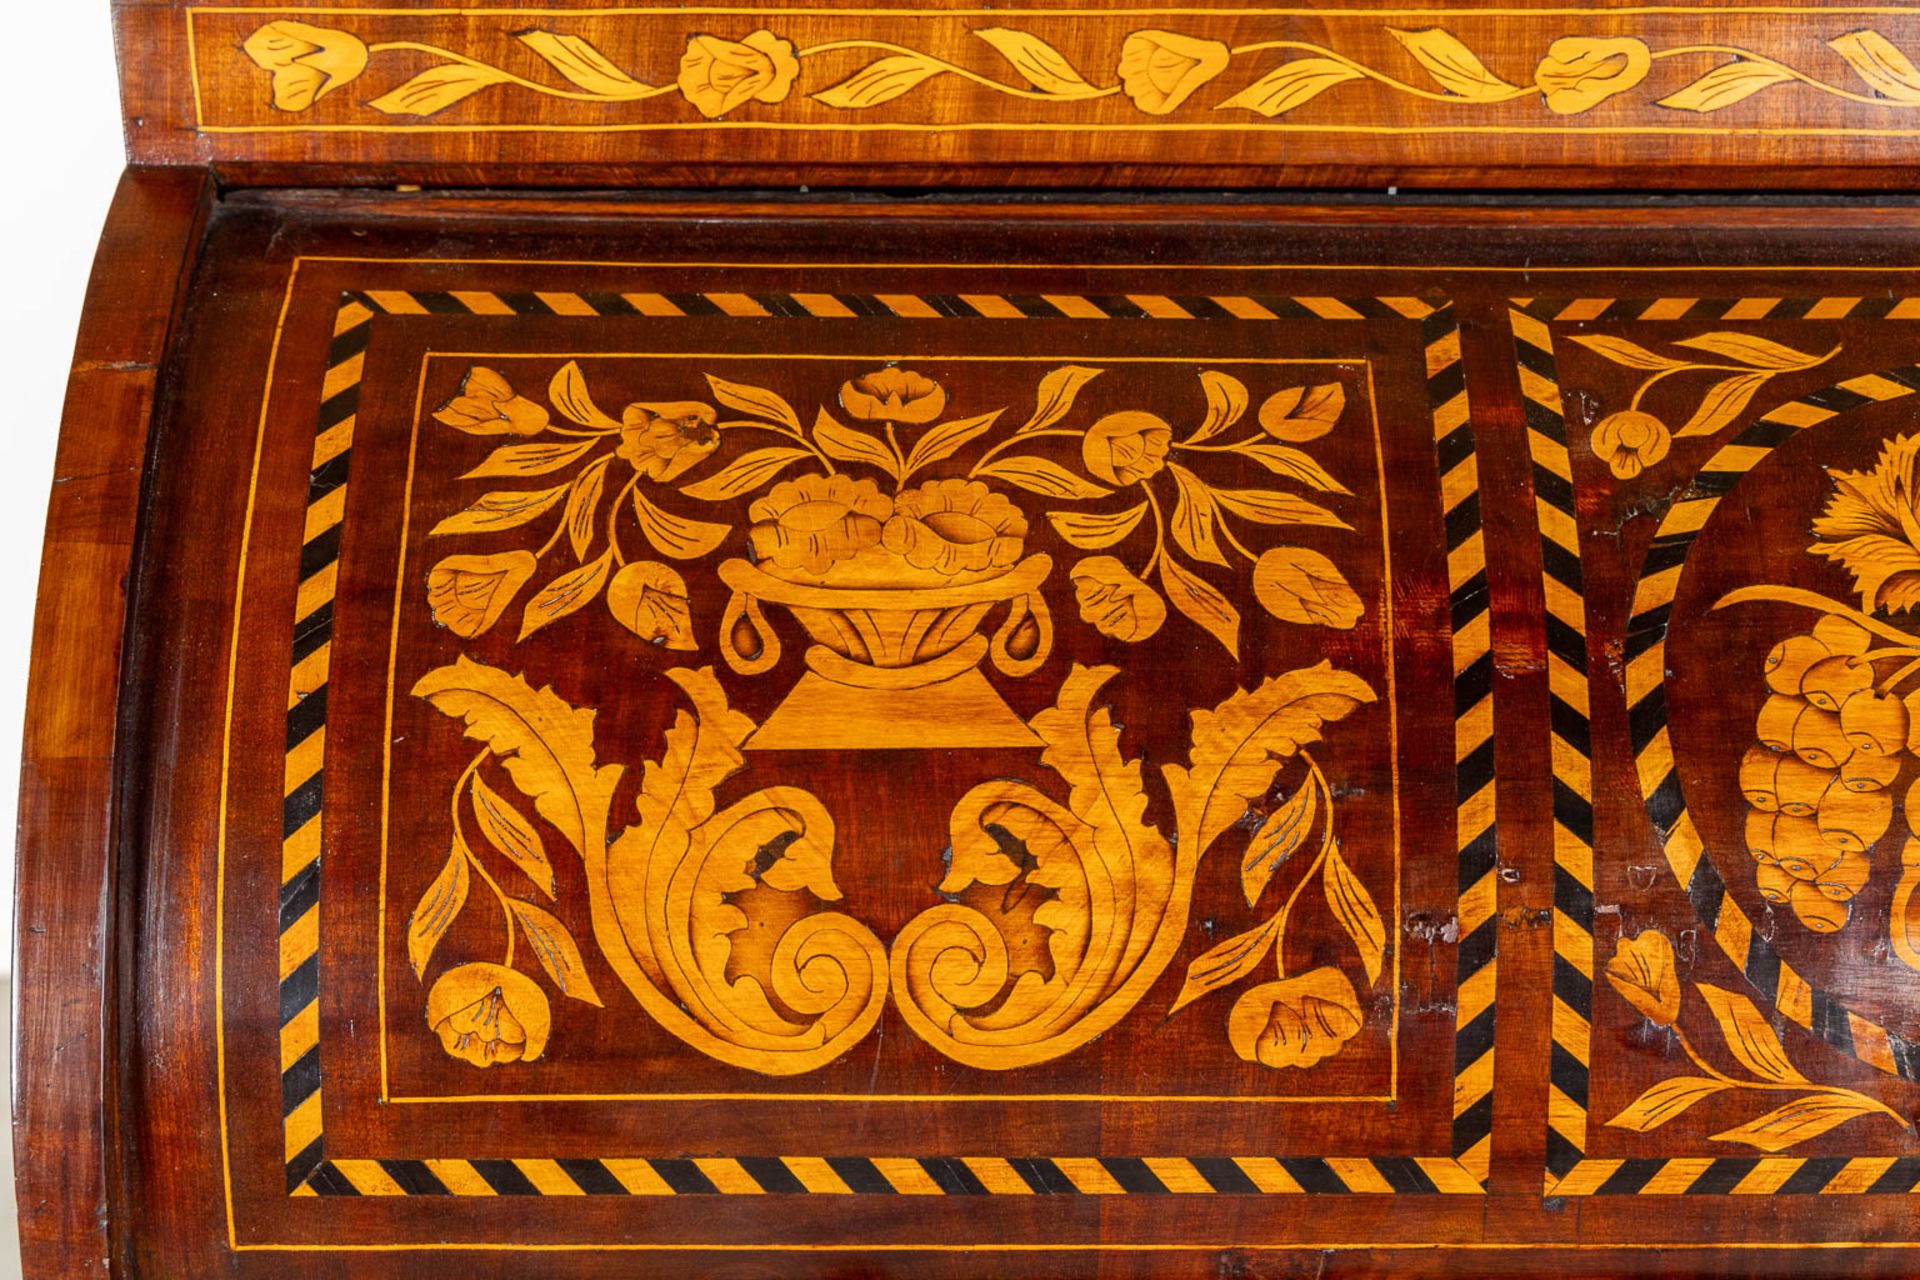 A fine marquetry inlay secretaire cabinet, The Netherlands, 18th C. (L:51 x W:112 x H:108 cm) - Image 11 of 20